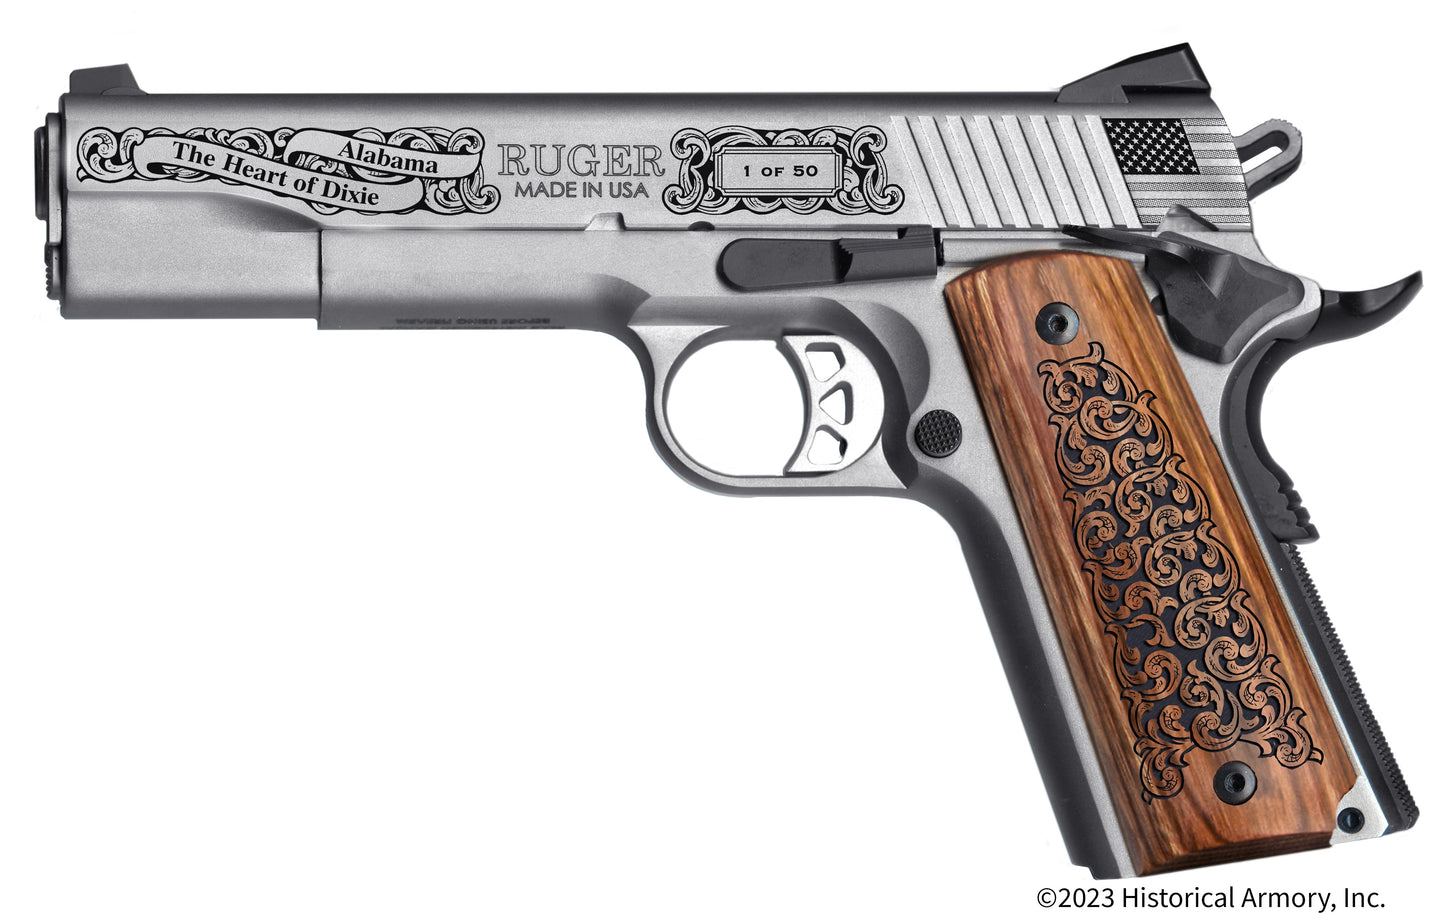 Lamar  County Alabama Engraved .45 Auto Ruger 1911